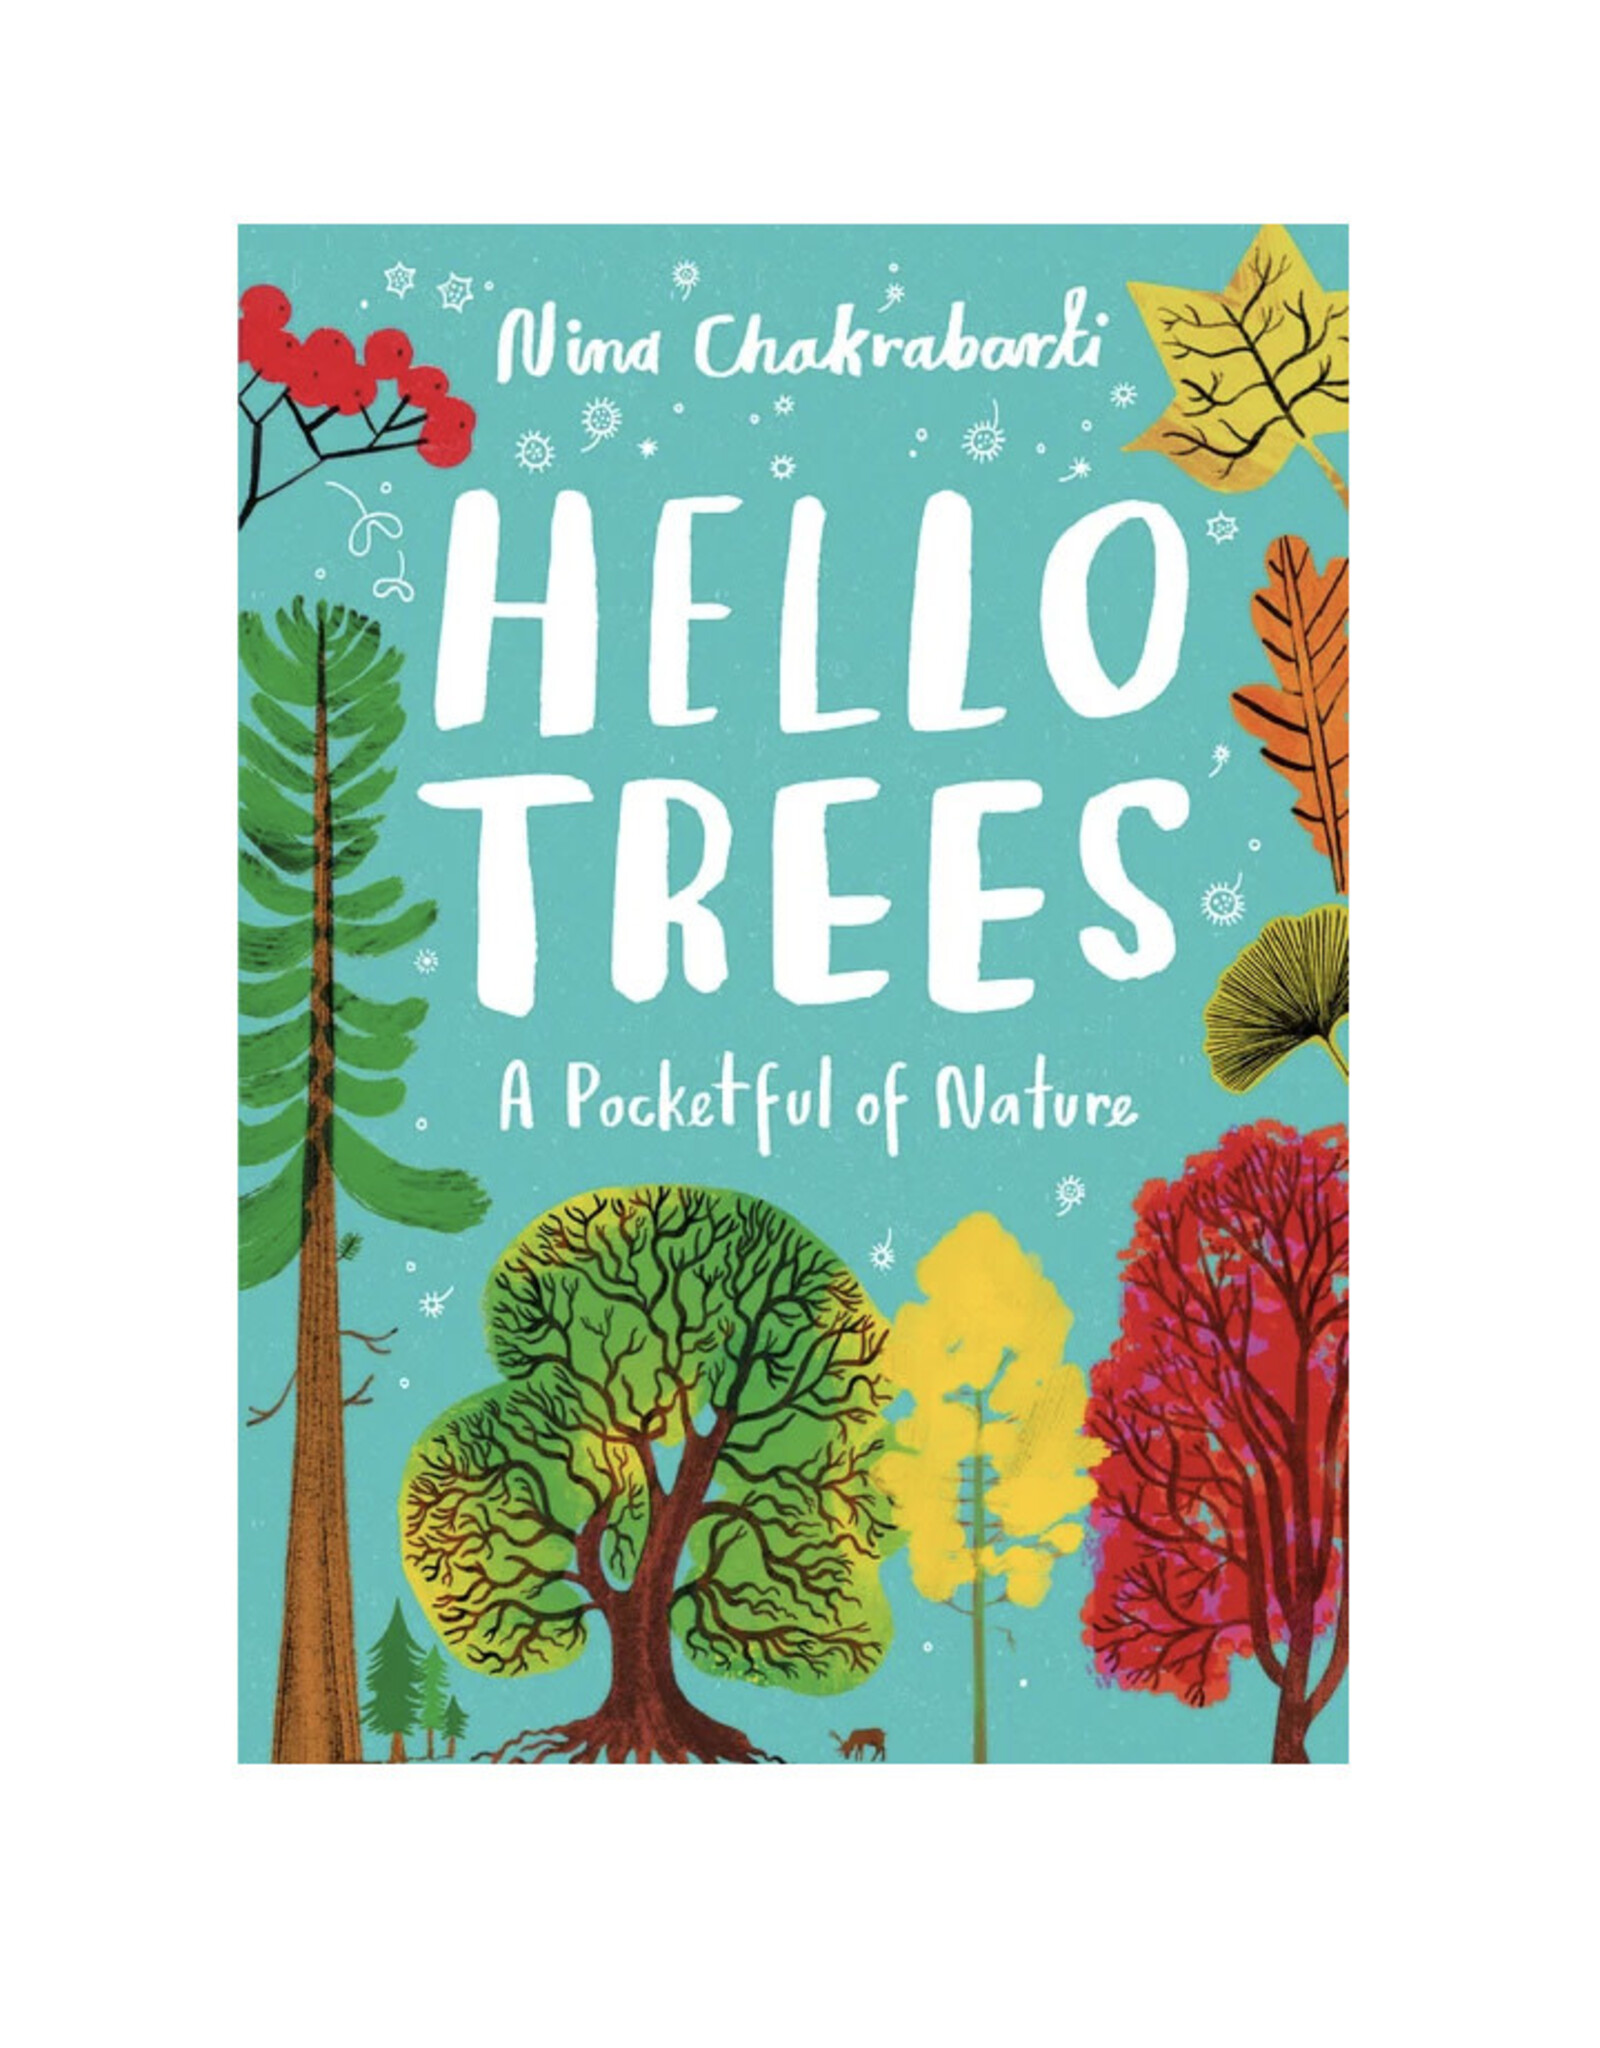 Hello Trees, Little Guide to Nature